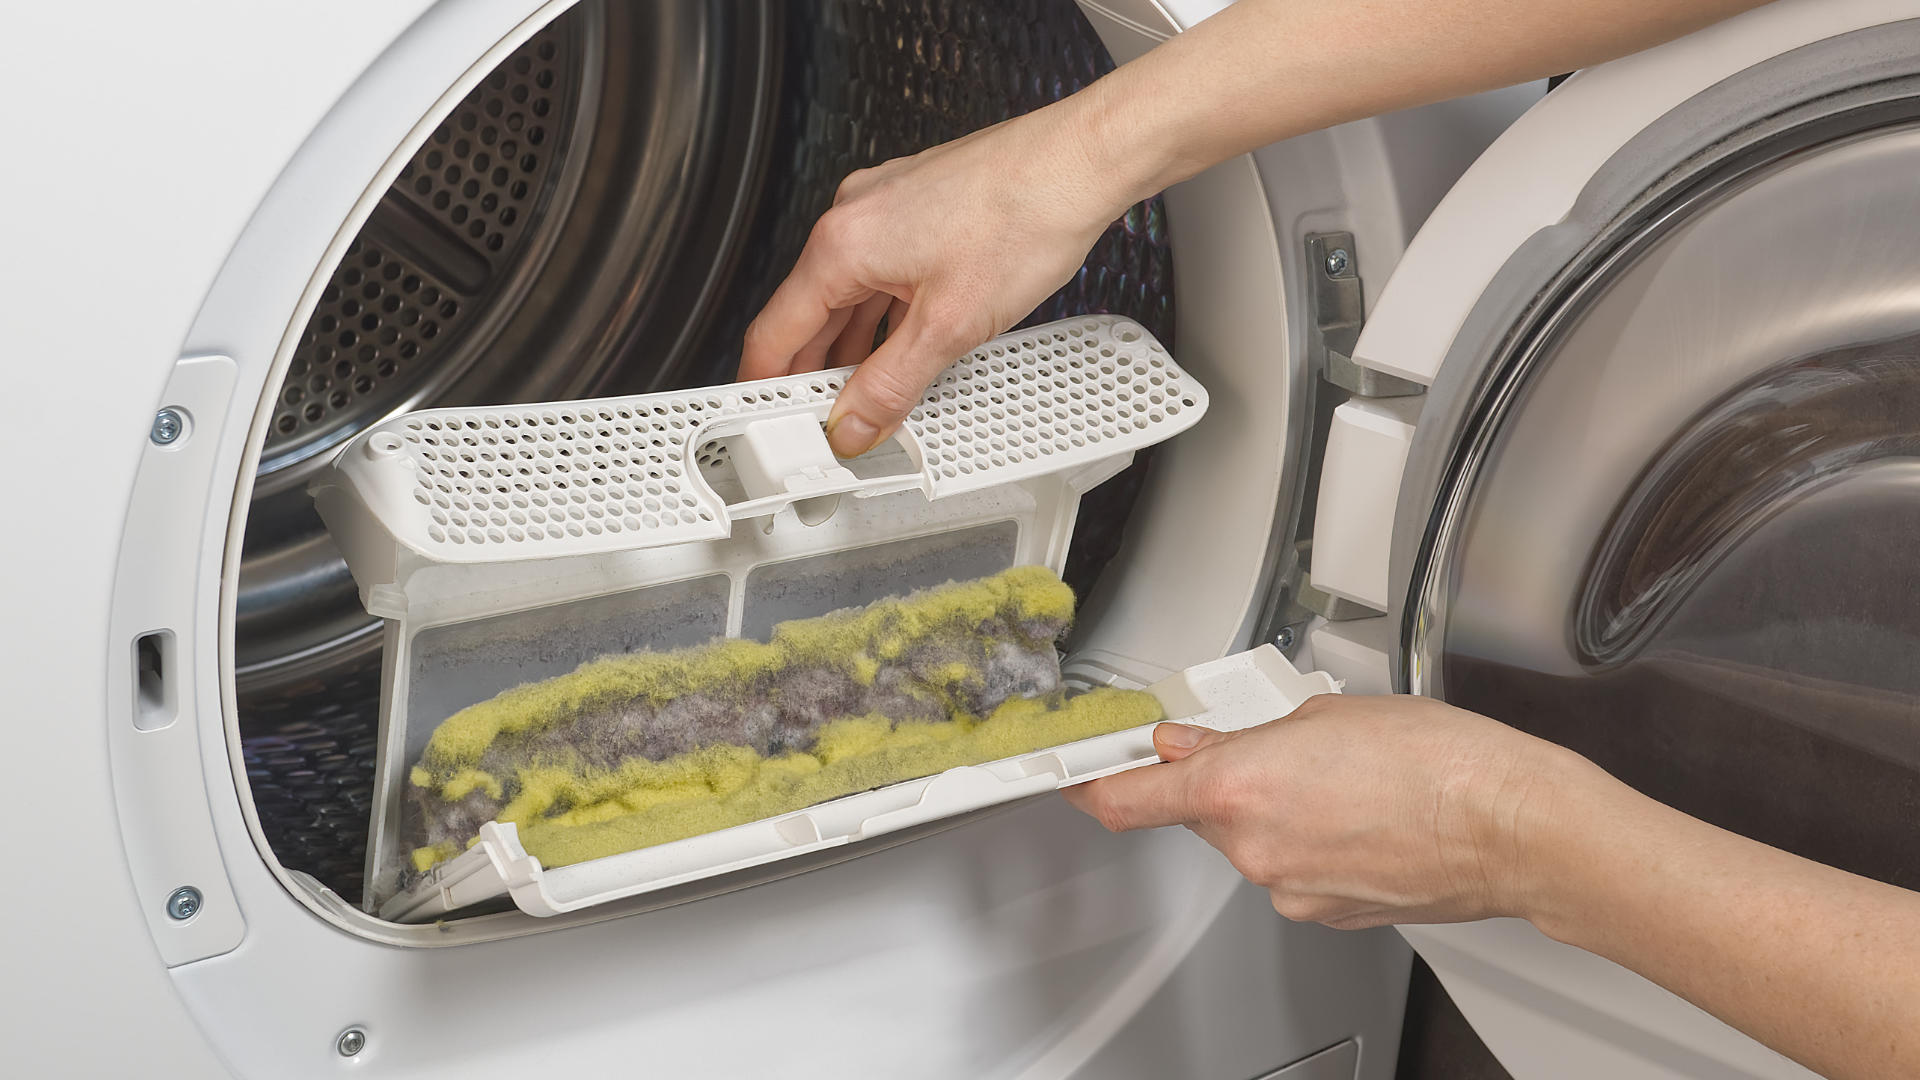 Dryer Smells Like Burning? Here's What to Do - Paradise Appliance Service